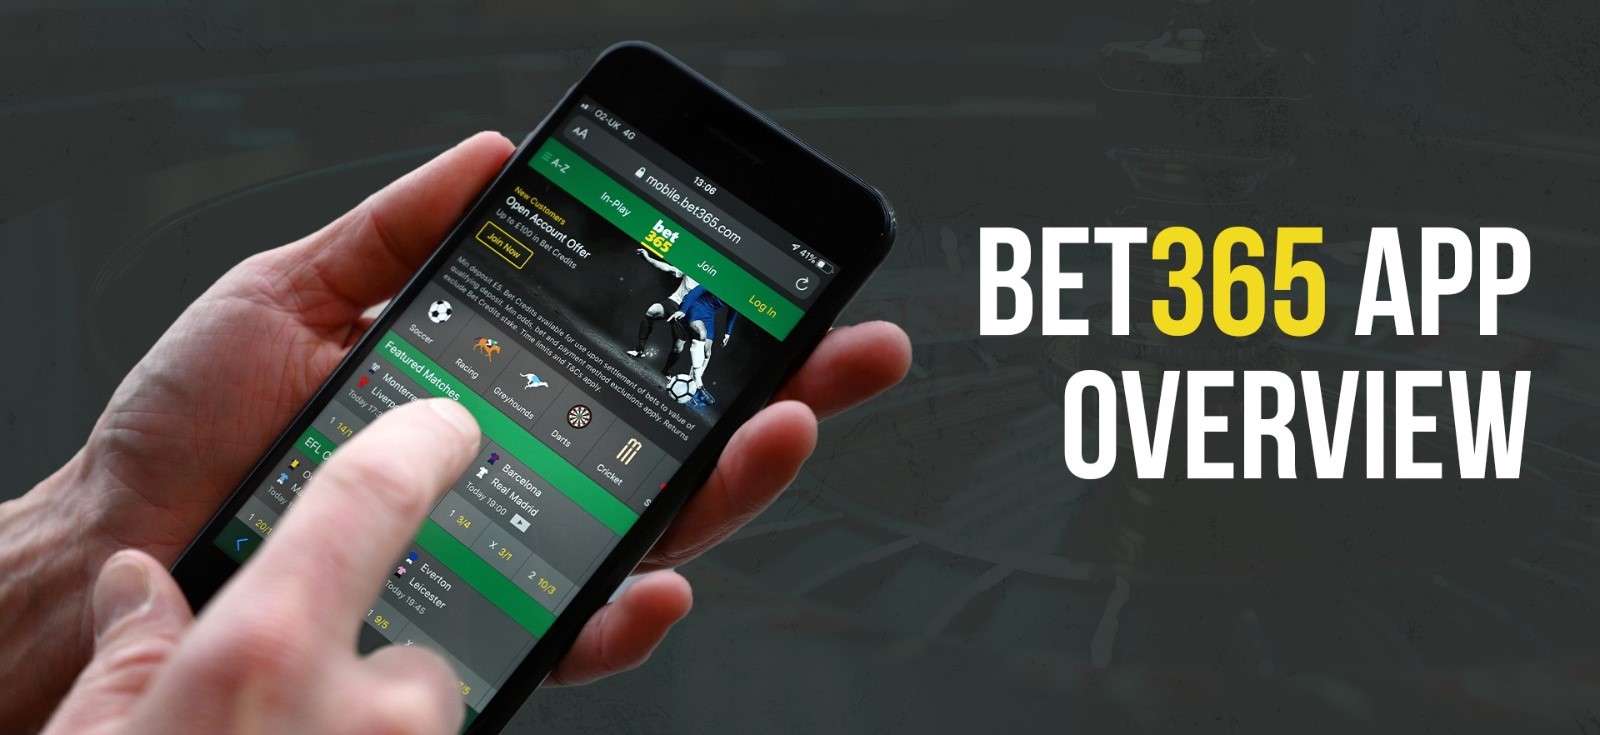 Bet365 overview